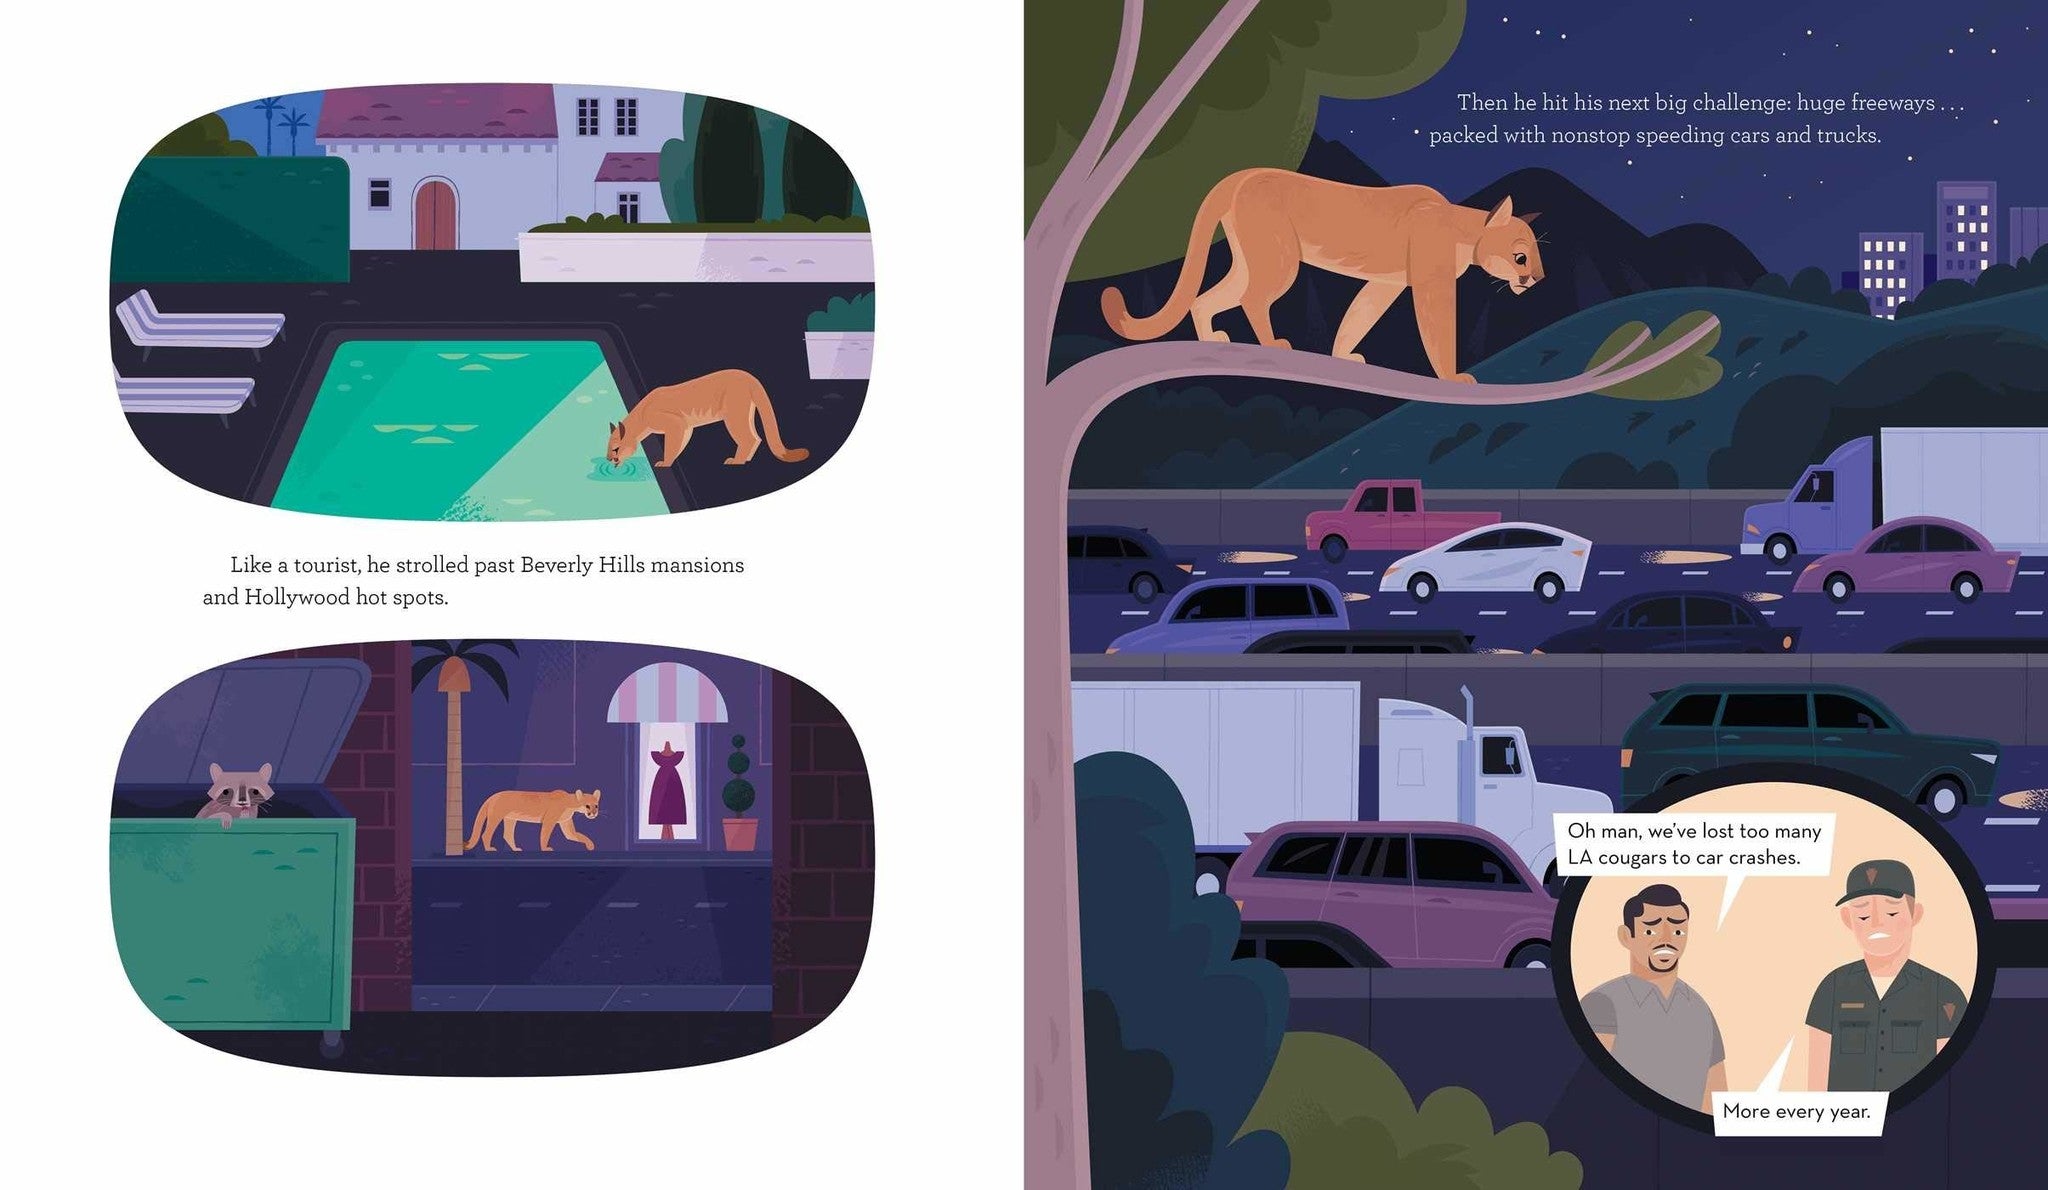 Cougar Crossing: How Hollywood's Celebrity Cougar Helped Build a Bridge for City Wildlife